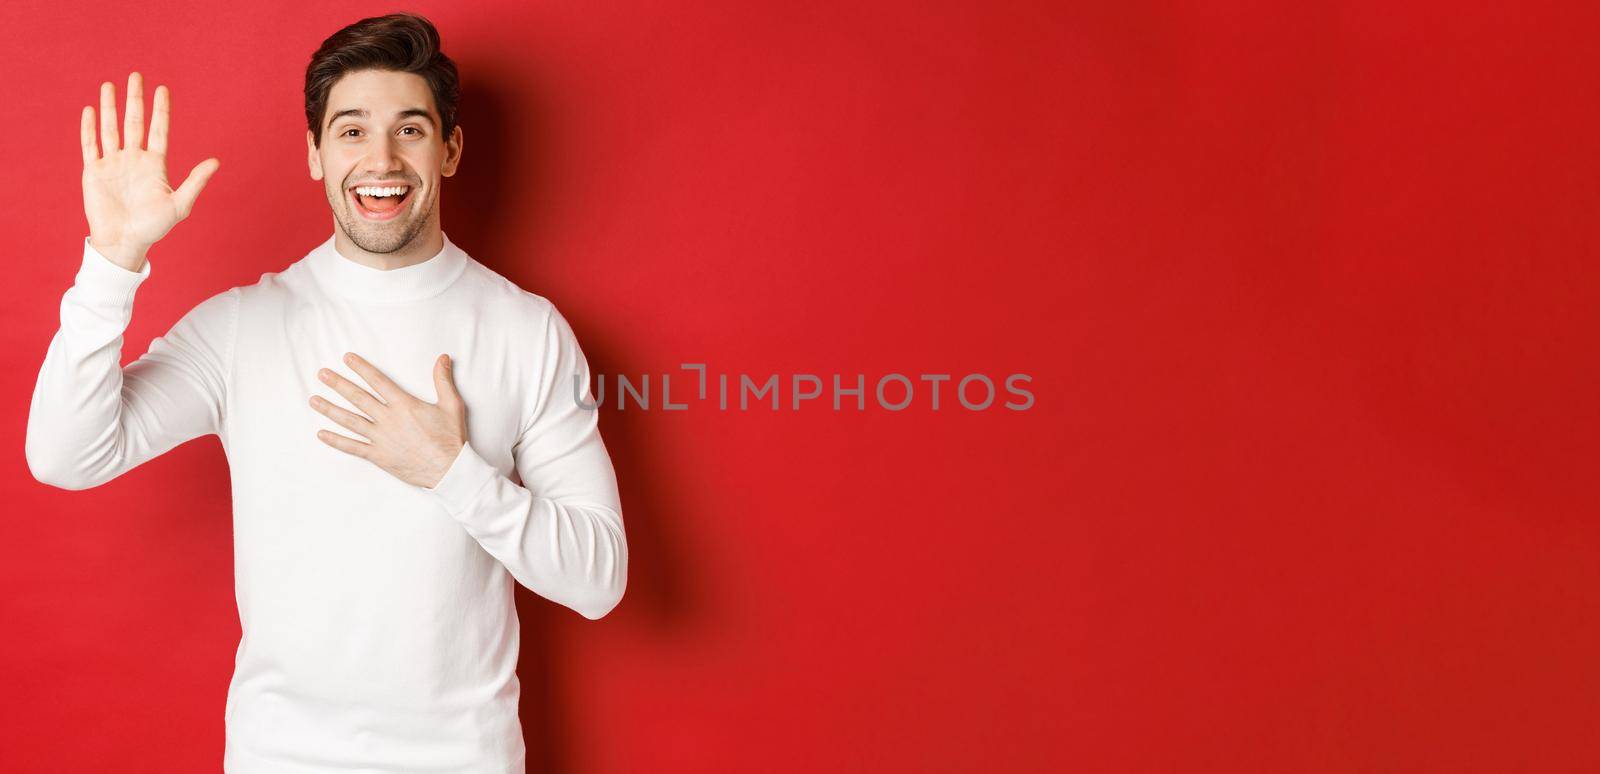 Portrait of honest smiling man in white sweater, making a promise, swearing to tell truth, standing against red background.